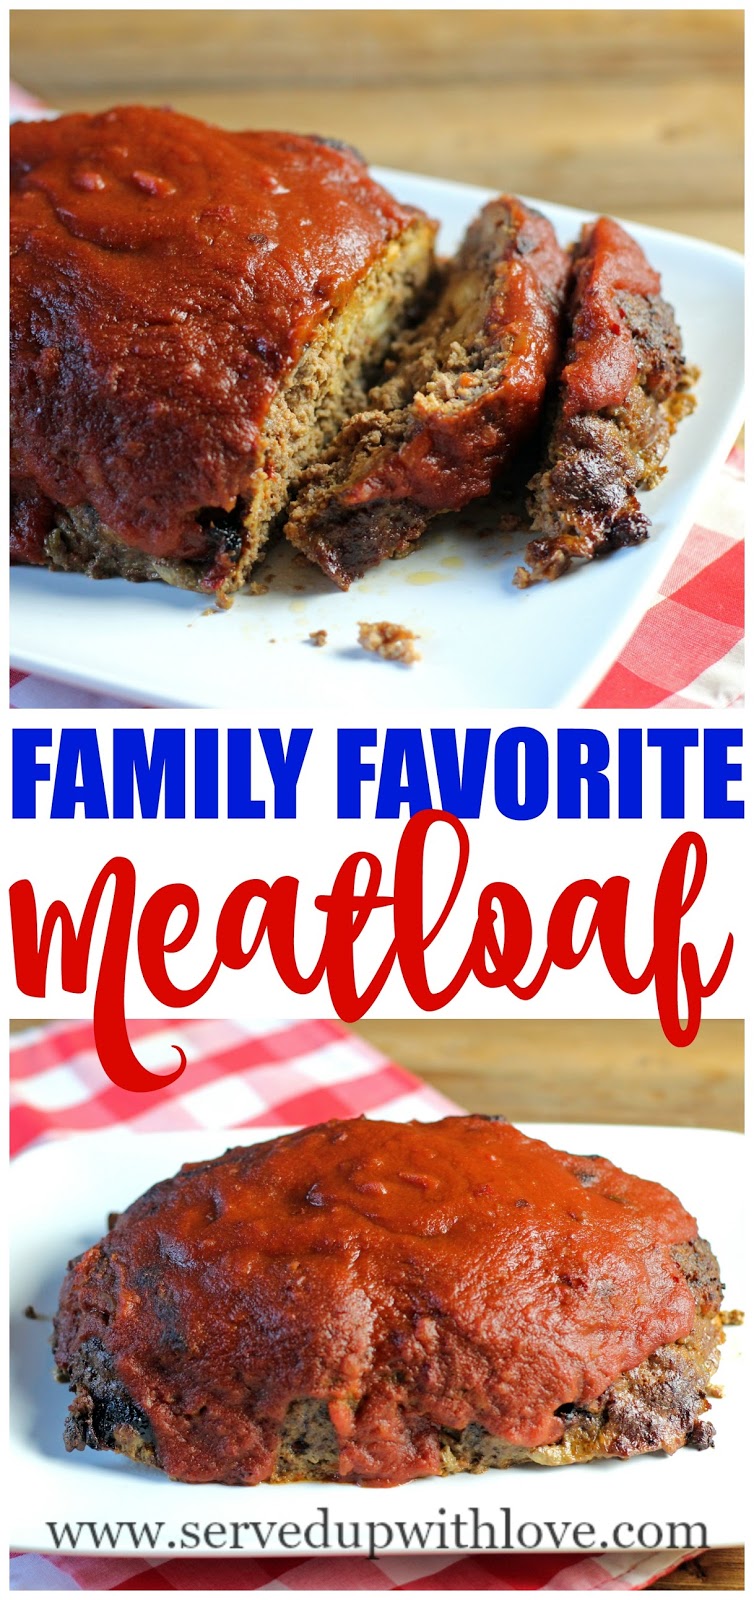 Served Up With Love: Family Favorite Meatloaf